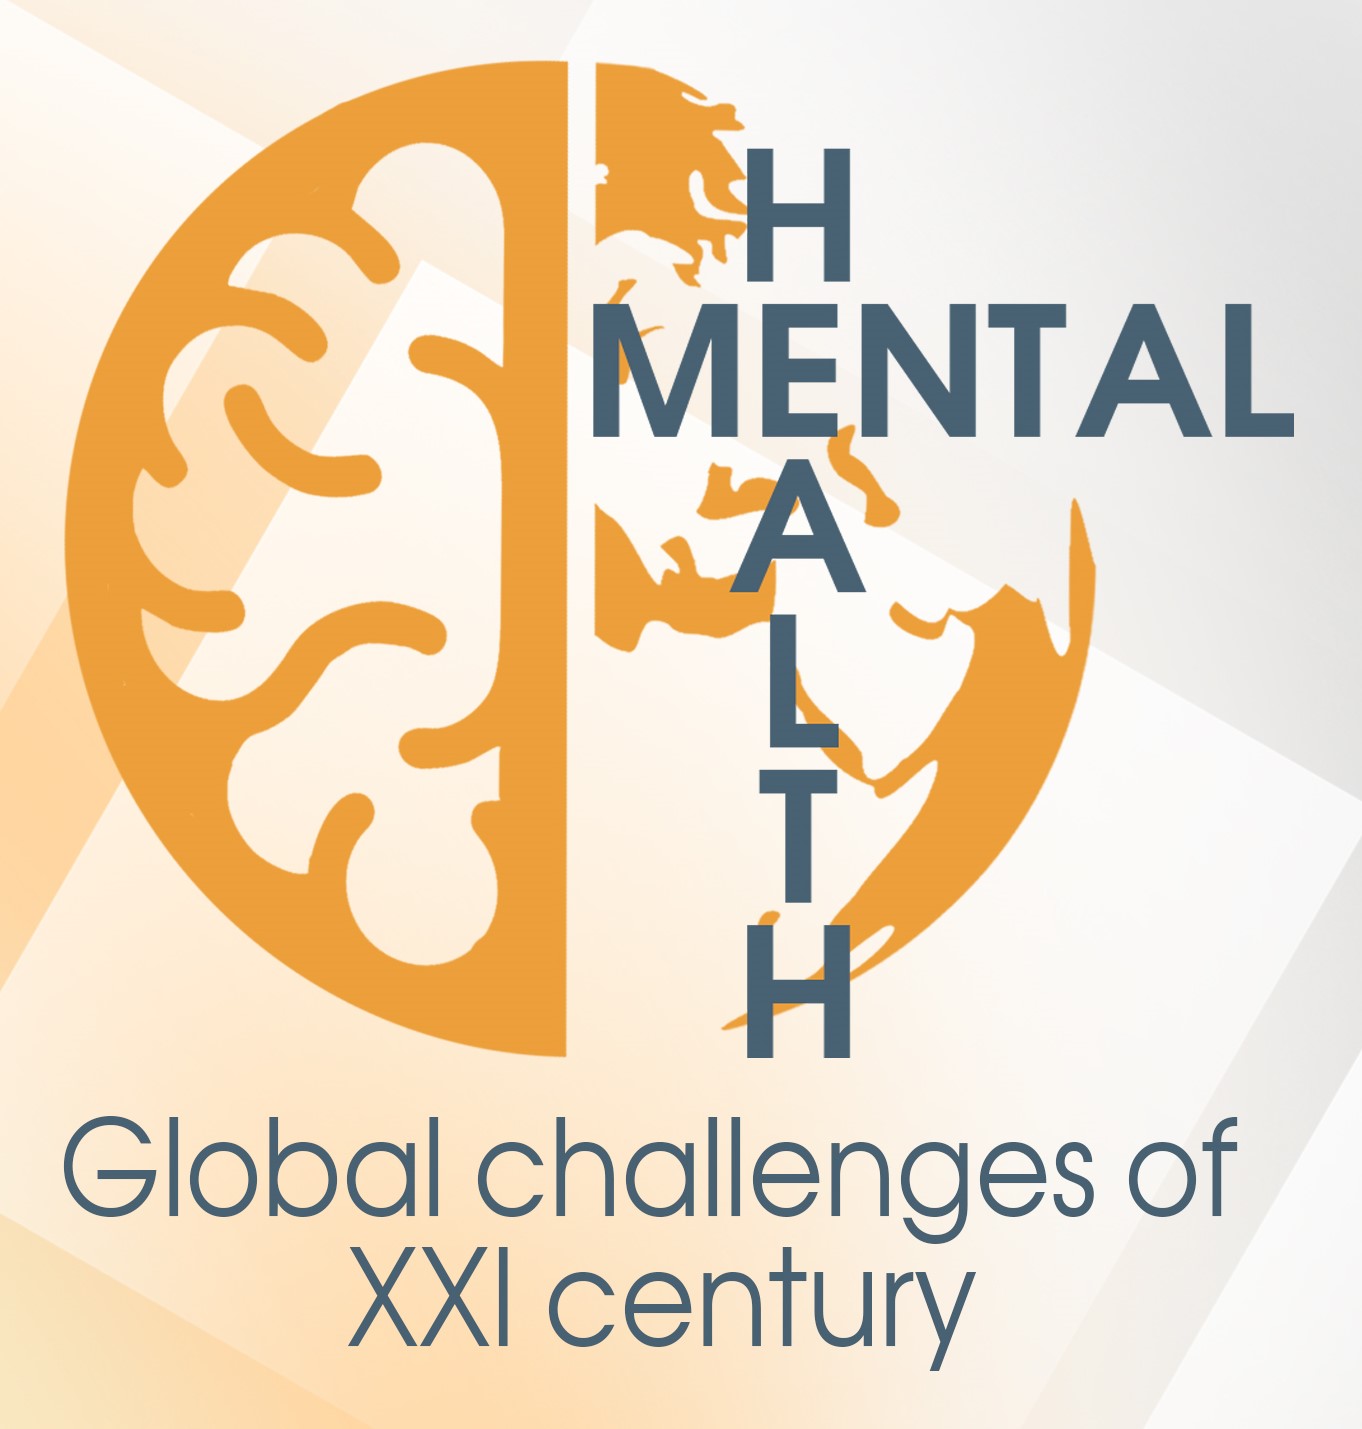 IV INTERNATIONAL CONFERENCE ON MENTAL HEALTH CARE “Mental Health: Global challenges of XXI century”